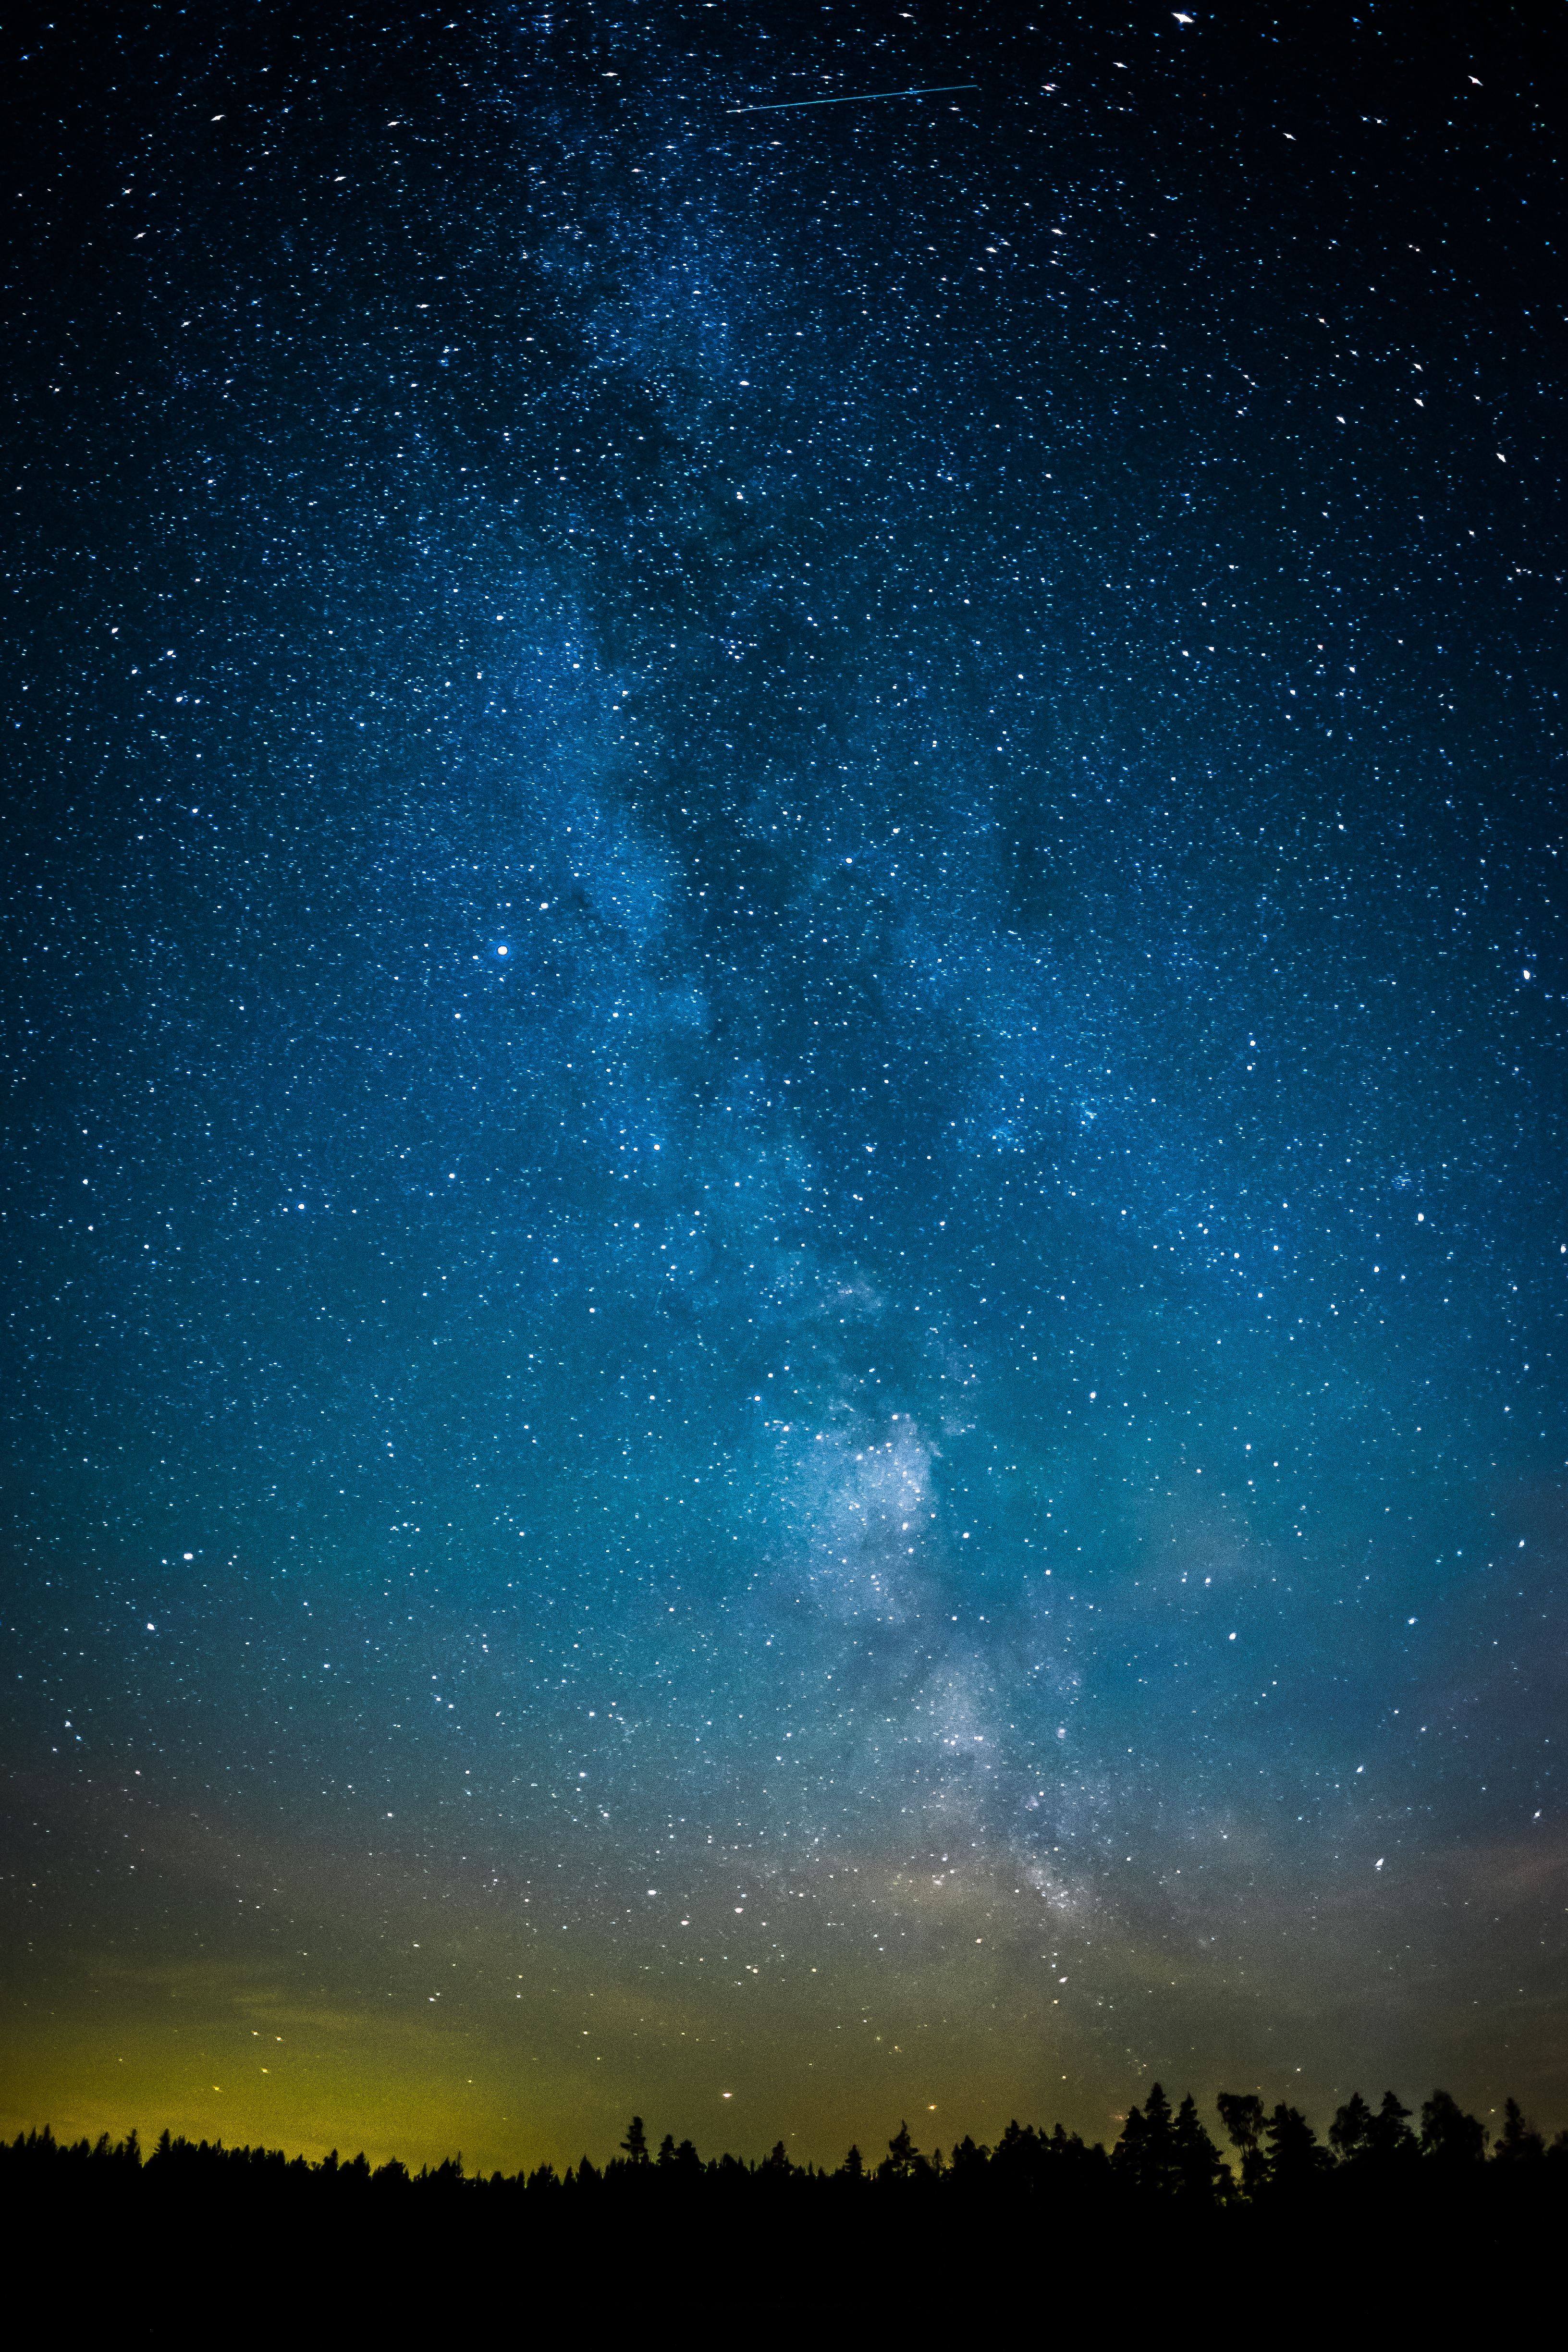 stars, universe, trees, dark, starry sky cell phone wallpapers